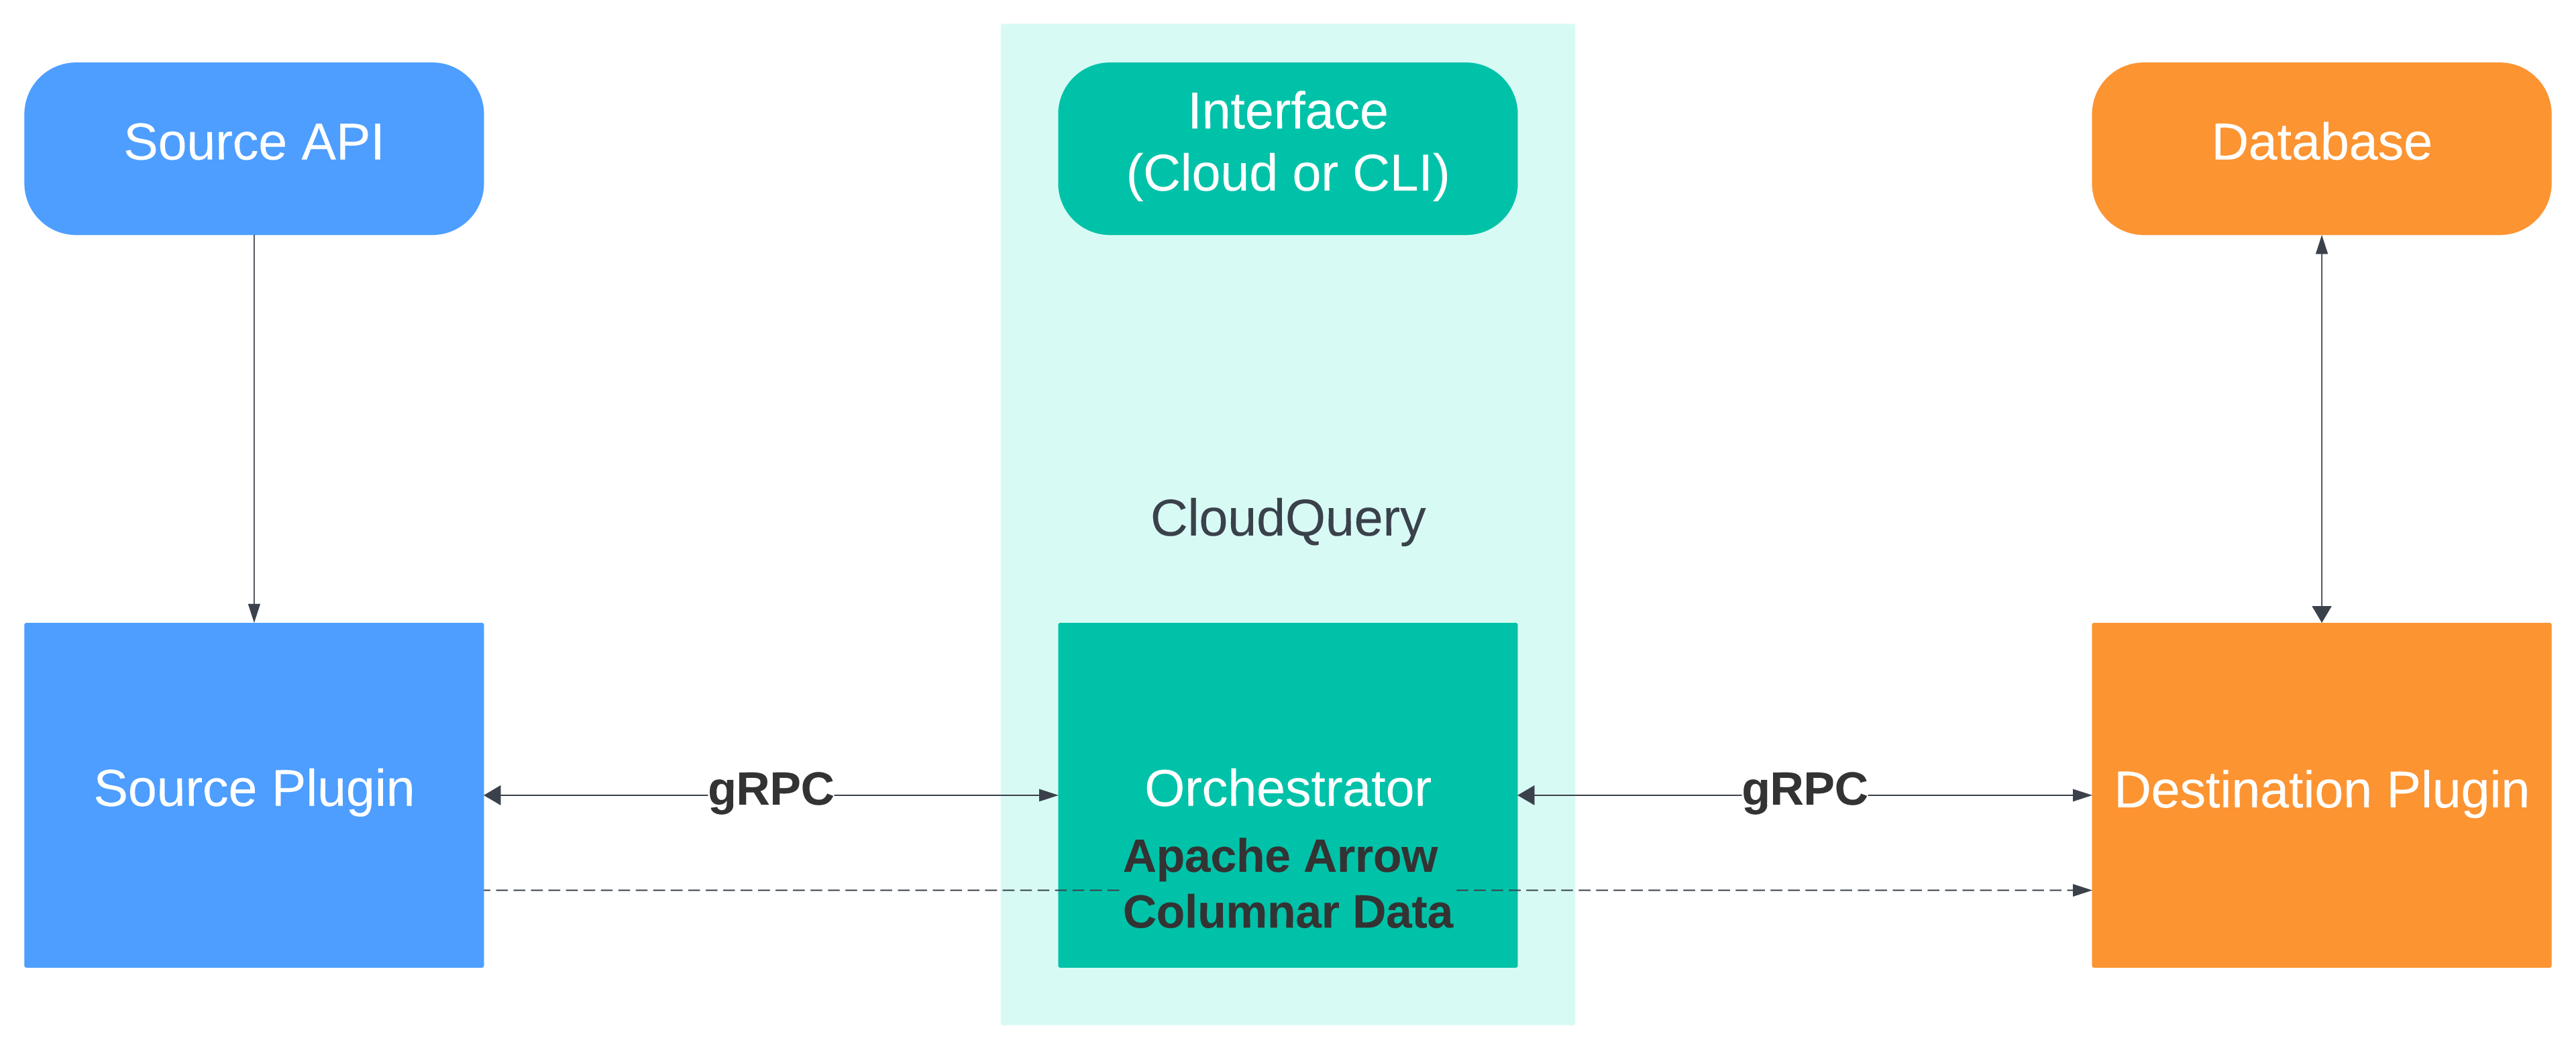 CloudQuery-Architecture - High-Level - Image shows a visualization of the CloudQuery architecture